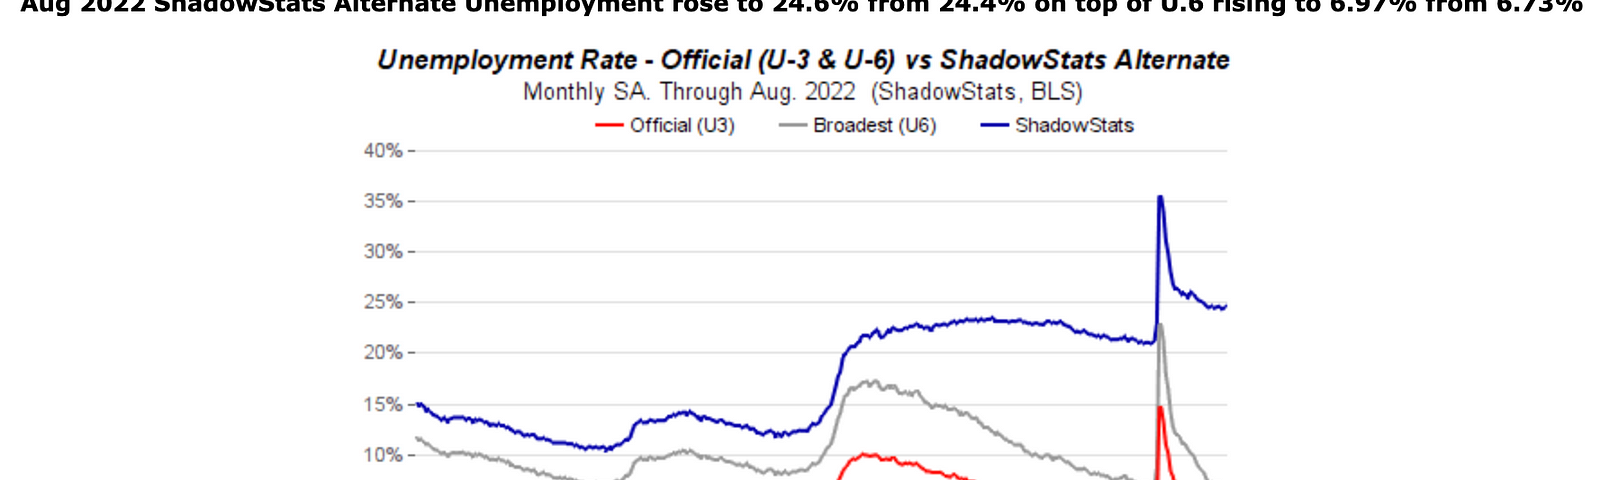 Shadow stats is showing the real rate of unemployment in the United States above 24 percent.